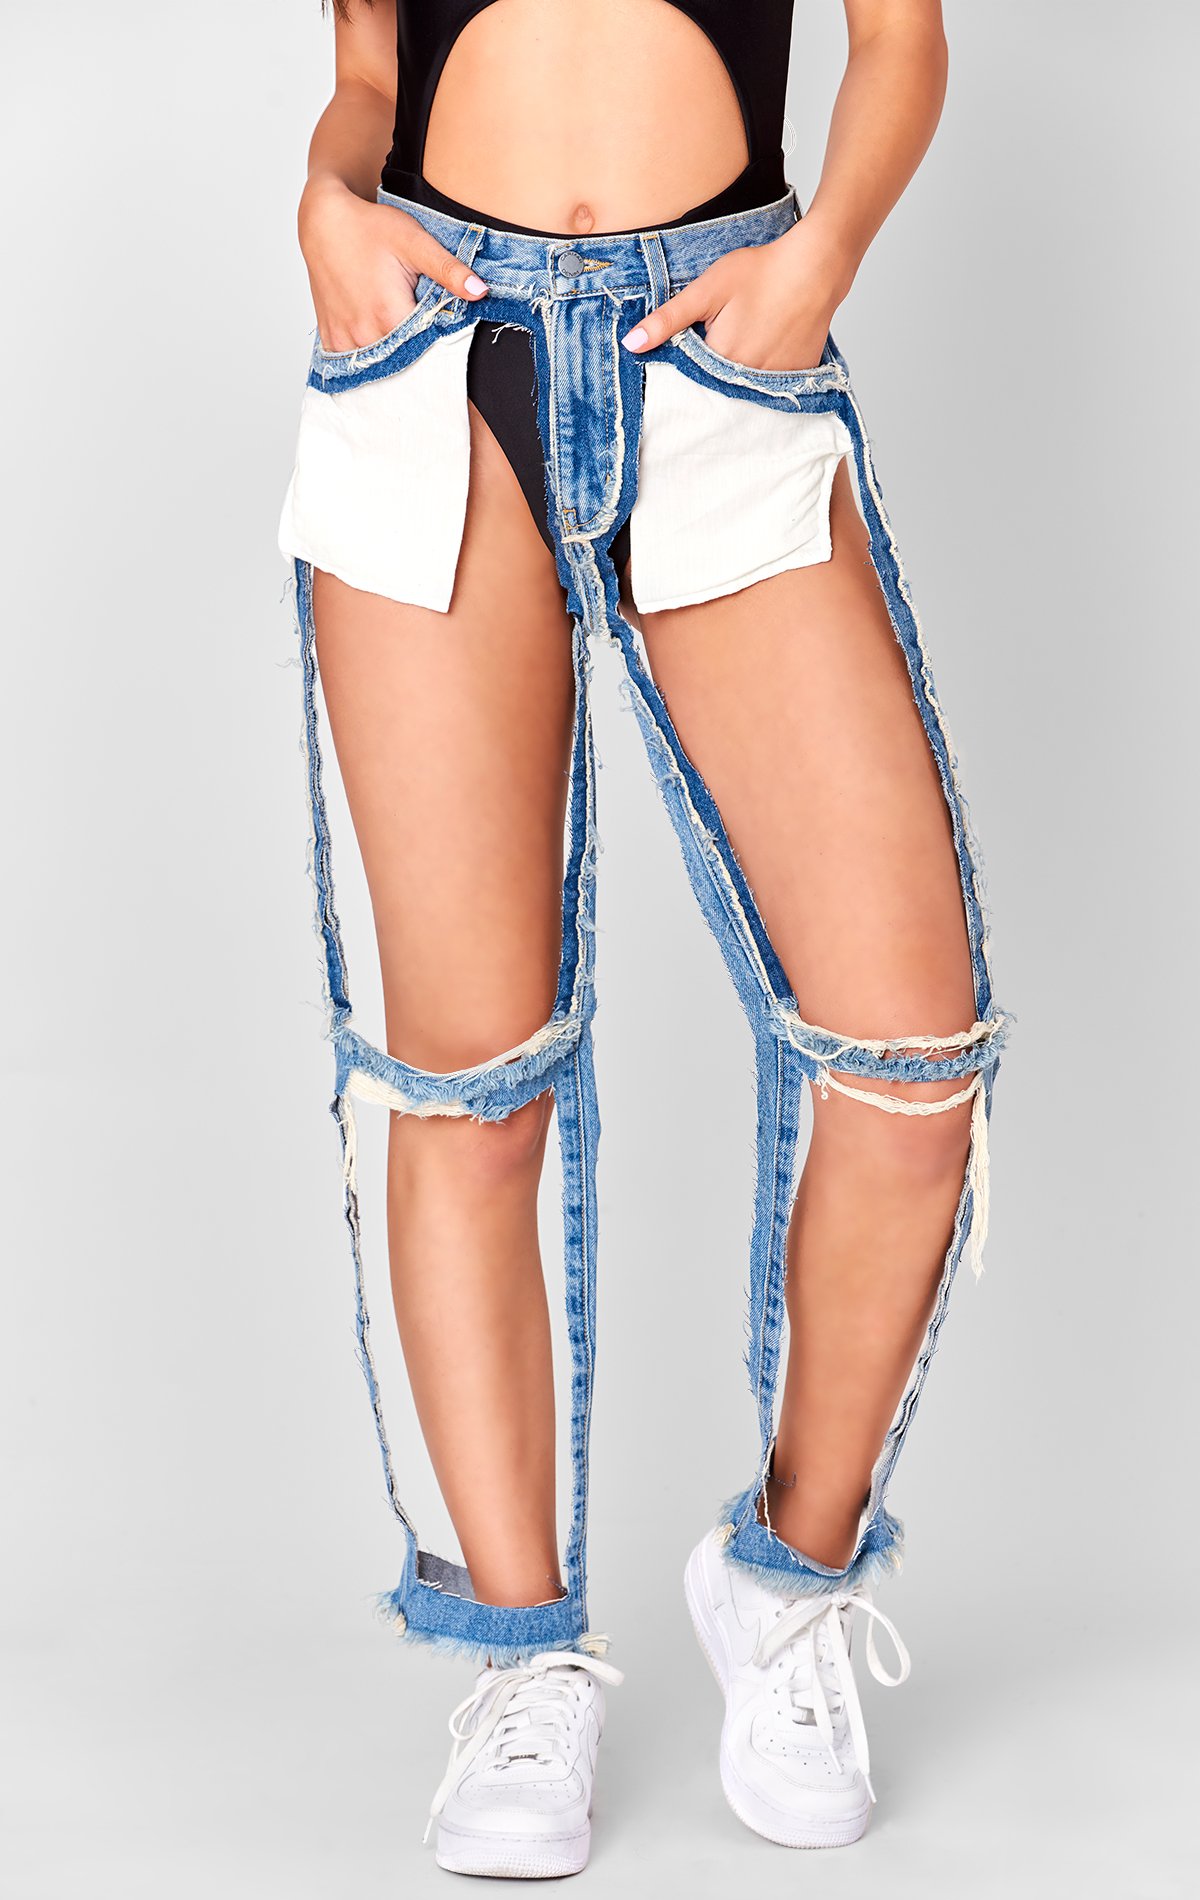 But now they are buying these extreme cutoff jeans for a mere $168!